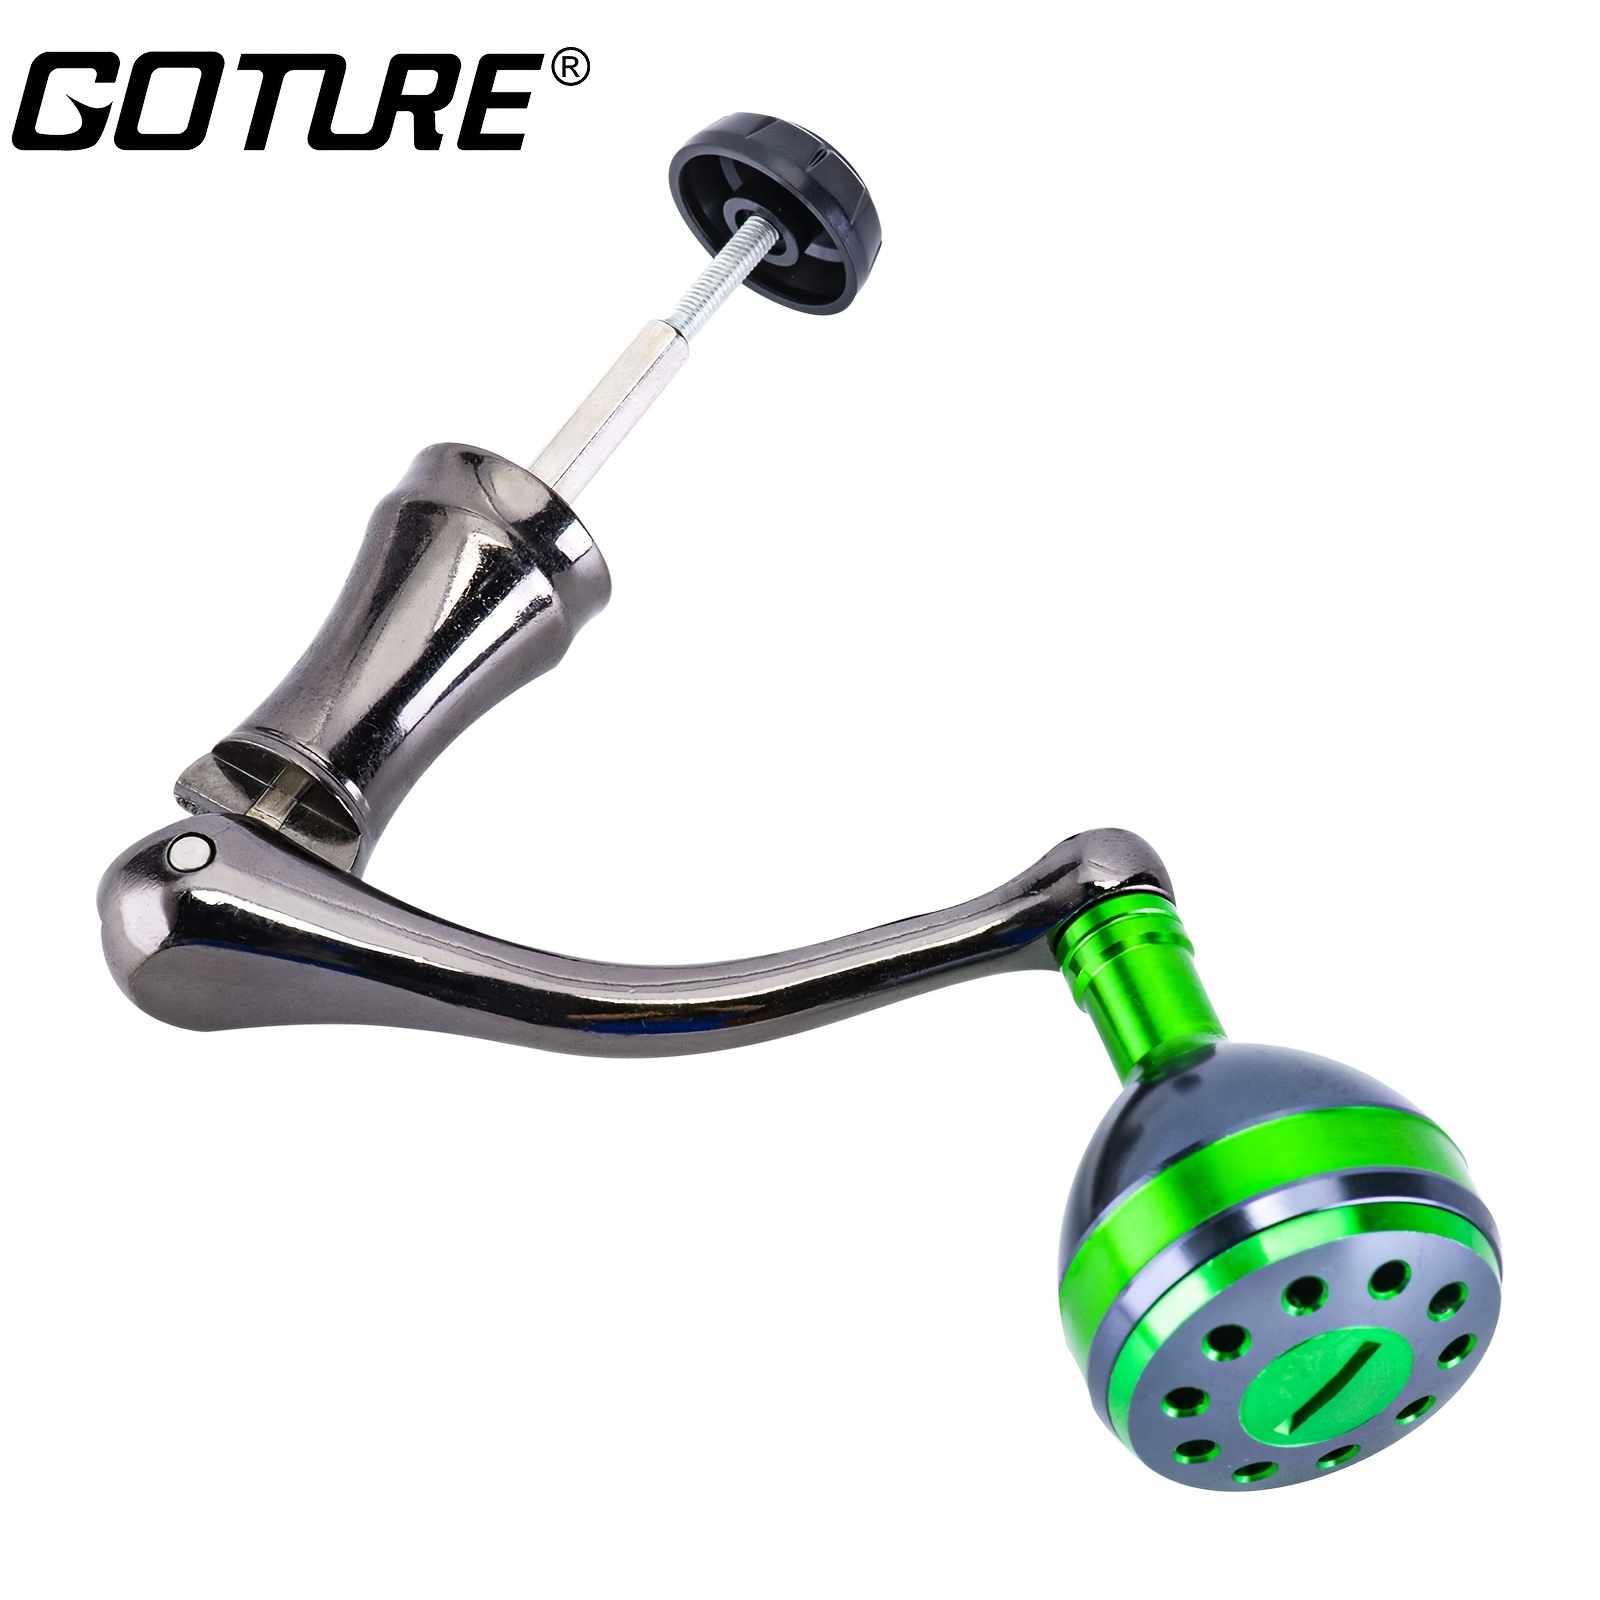 * Metal Spinning Reel Handle with Round Power Knob - 3 Sizes (S/M/L) for  Comfortable Fishing Experience